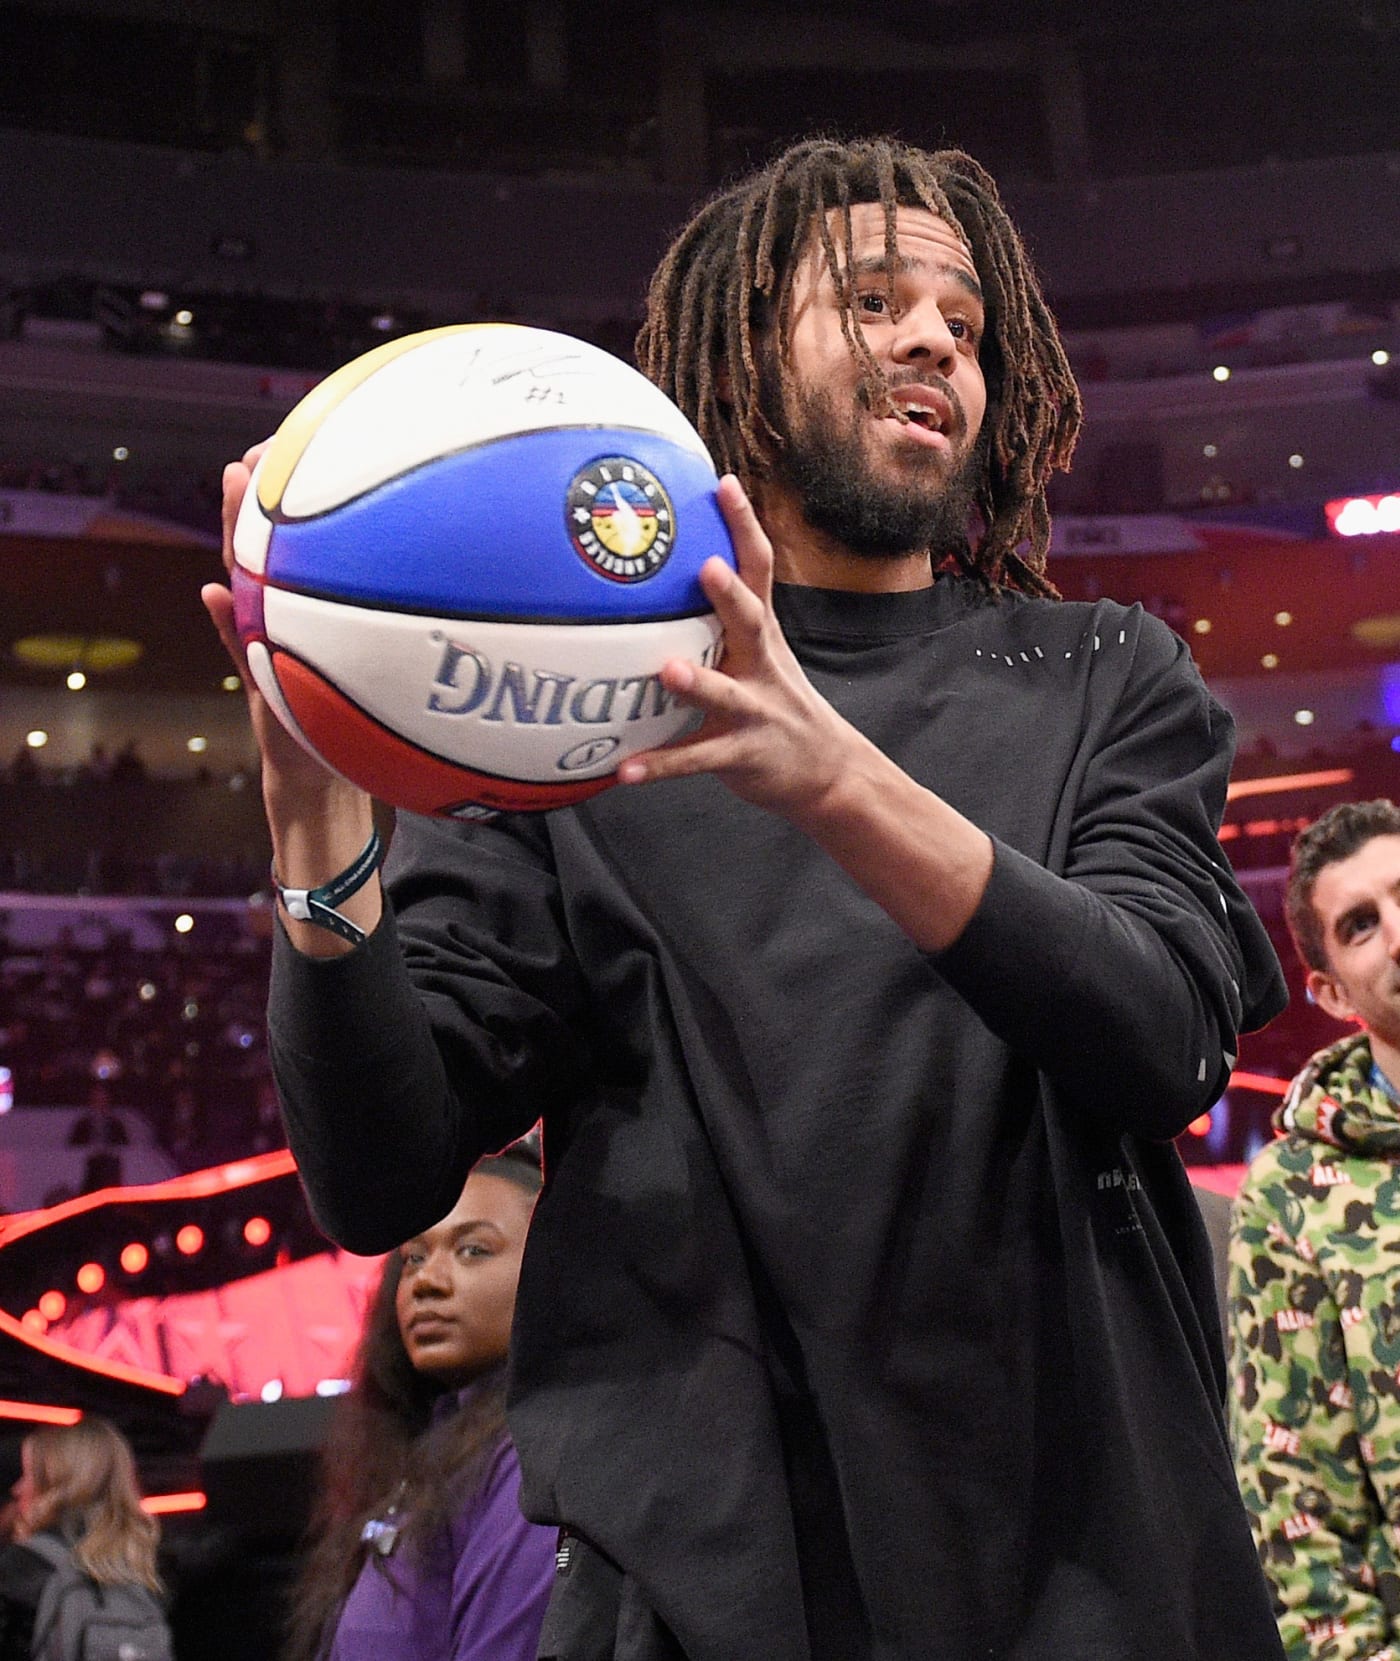 J. Cole attends the 2018 Verizon Slam Dunk Contest at Staples Center on February 17, 2018